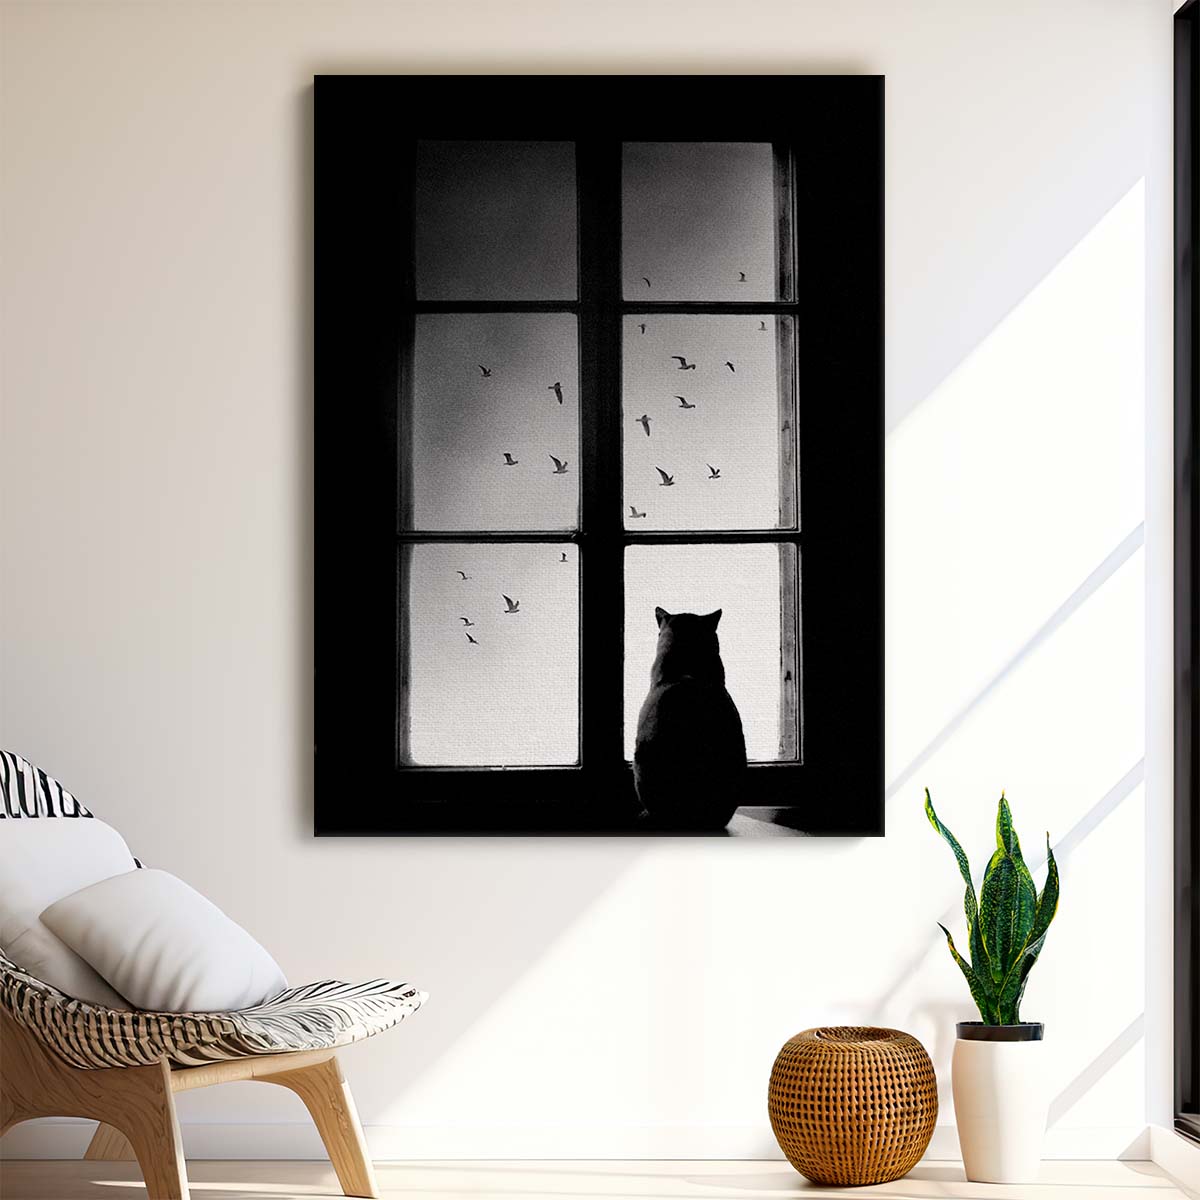 Monochrome Cat Observing Birds Migration Photography Art by Luxuriance Designs, made in USA